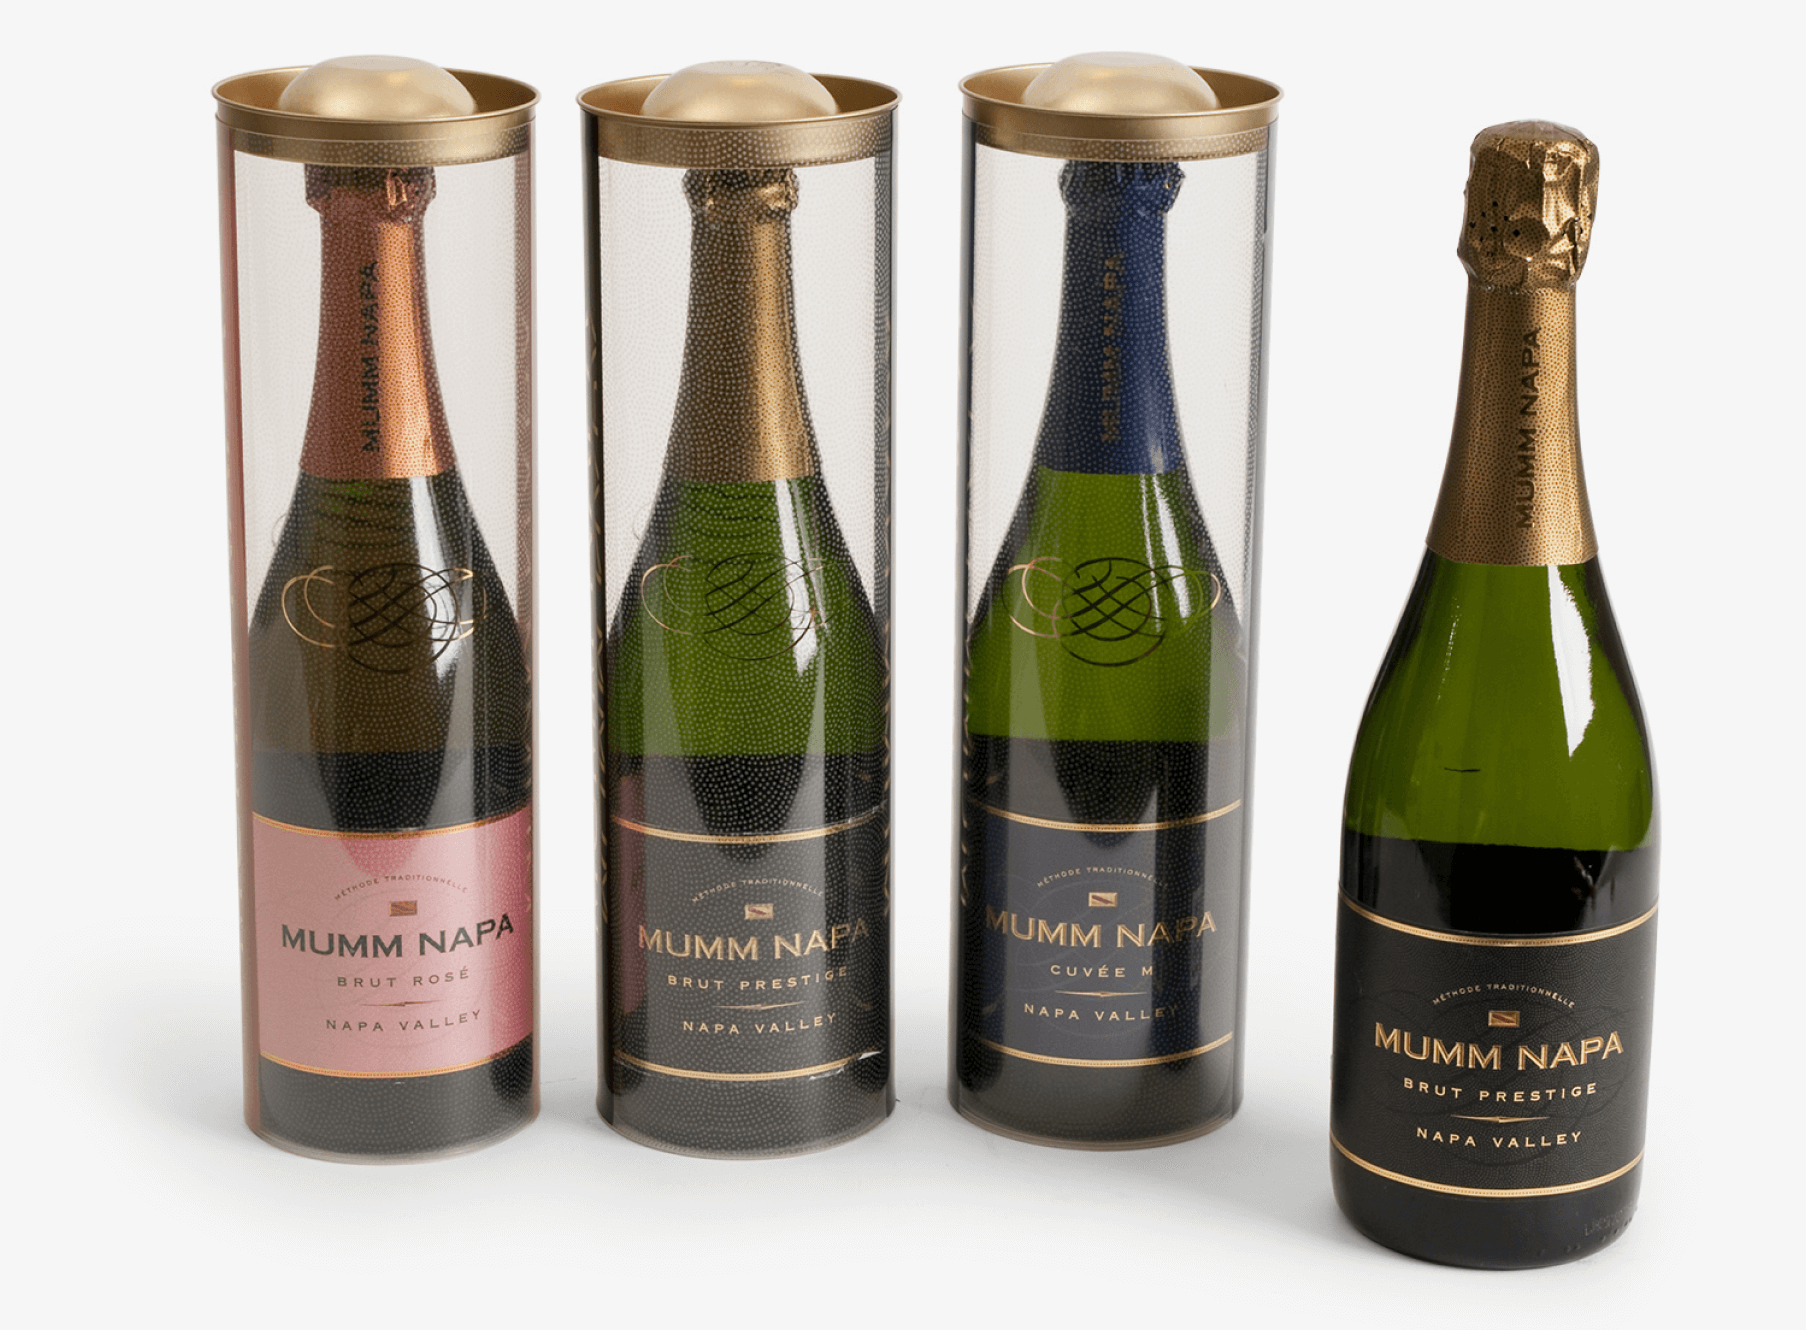 Three bottles of champagne on a white background.